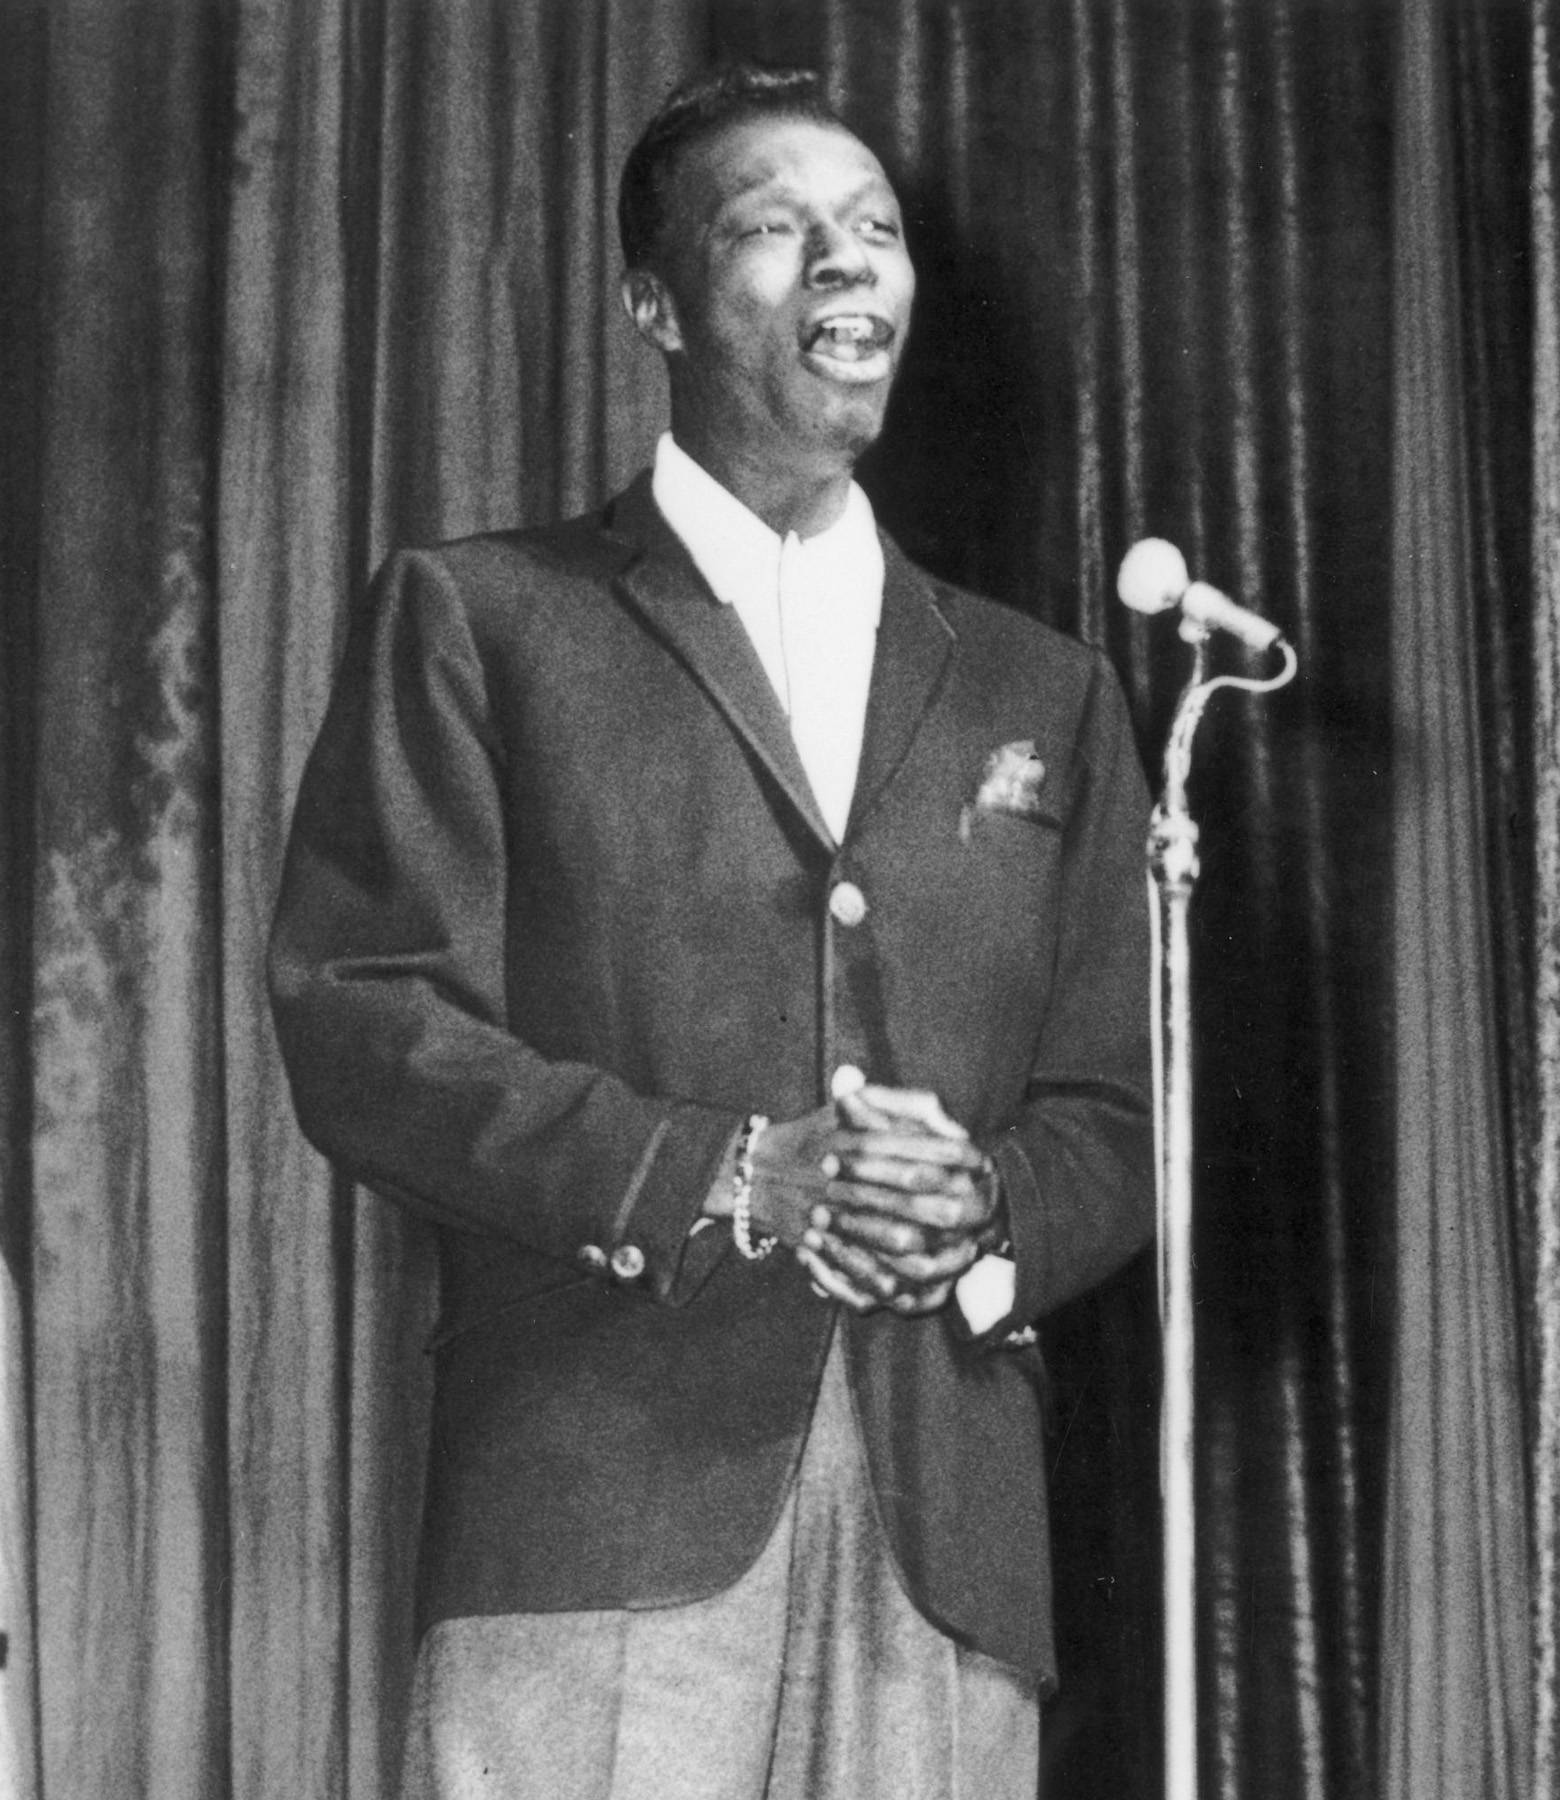 Nat King Cole, 'Unforgettable' - We're sure that their little expedition on that remote island is an unforgettable moment in their relationship.(Photo: Evening Standard/Getty Images)